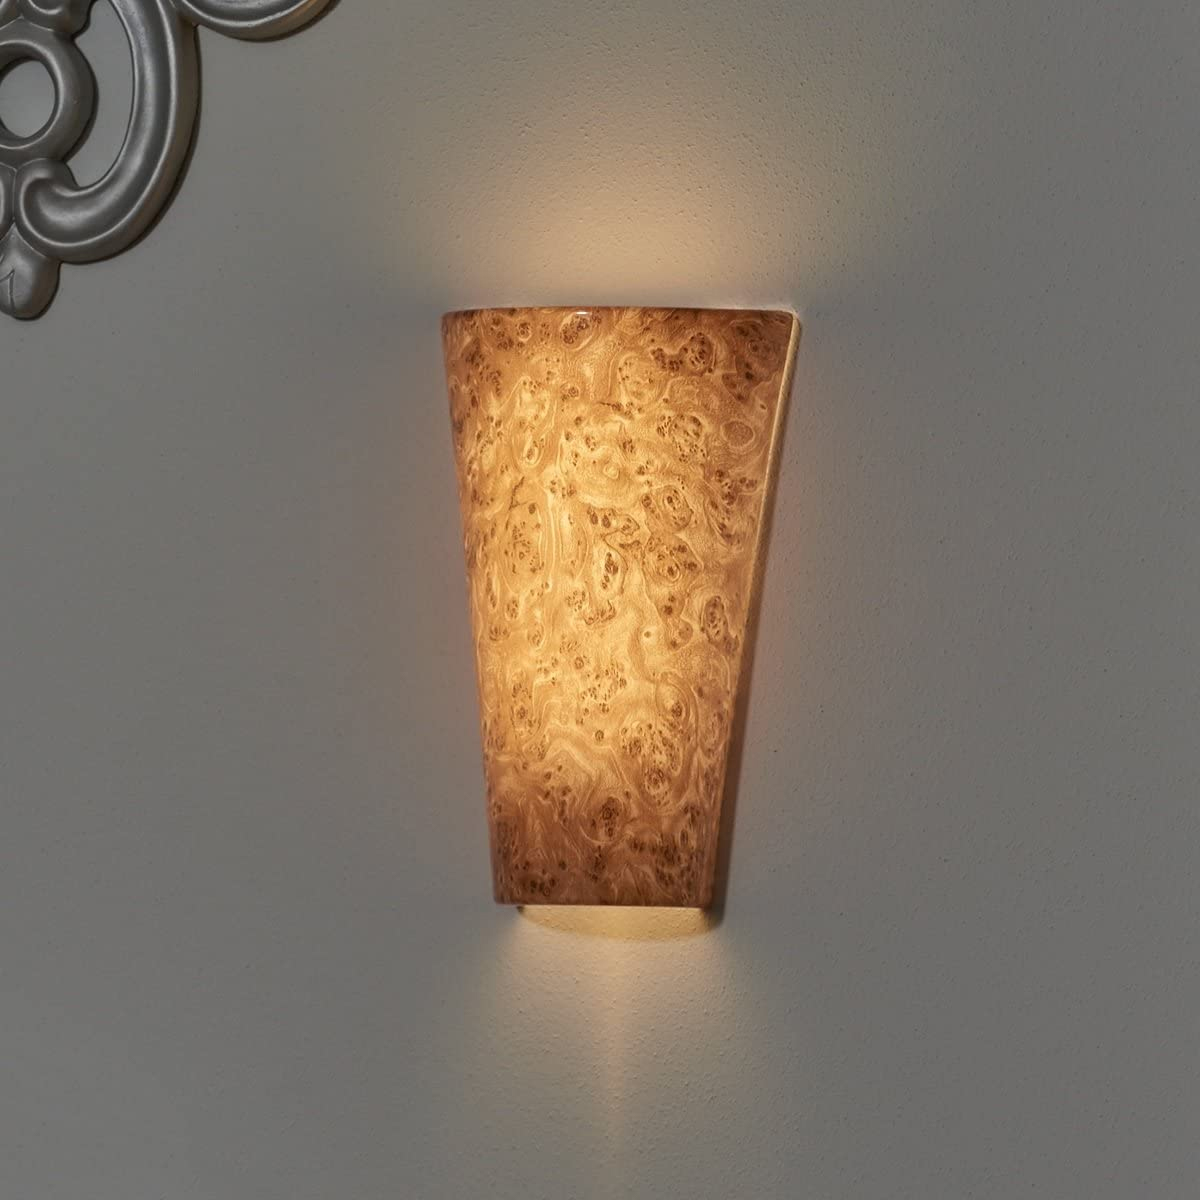 smart wall sconce